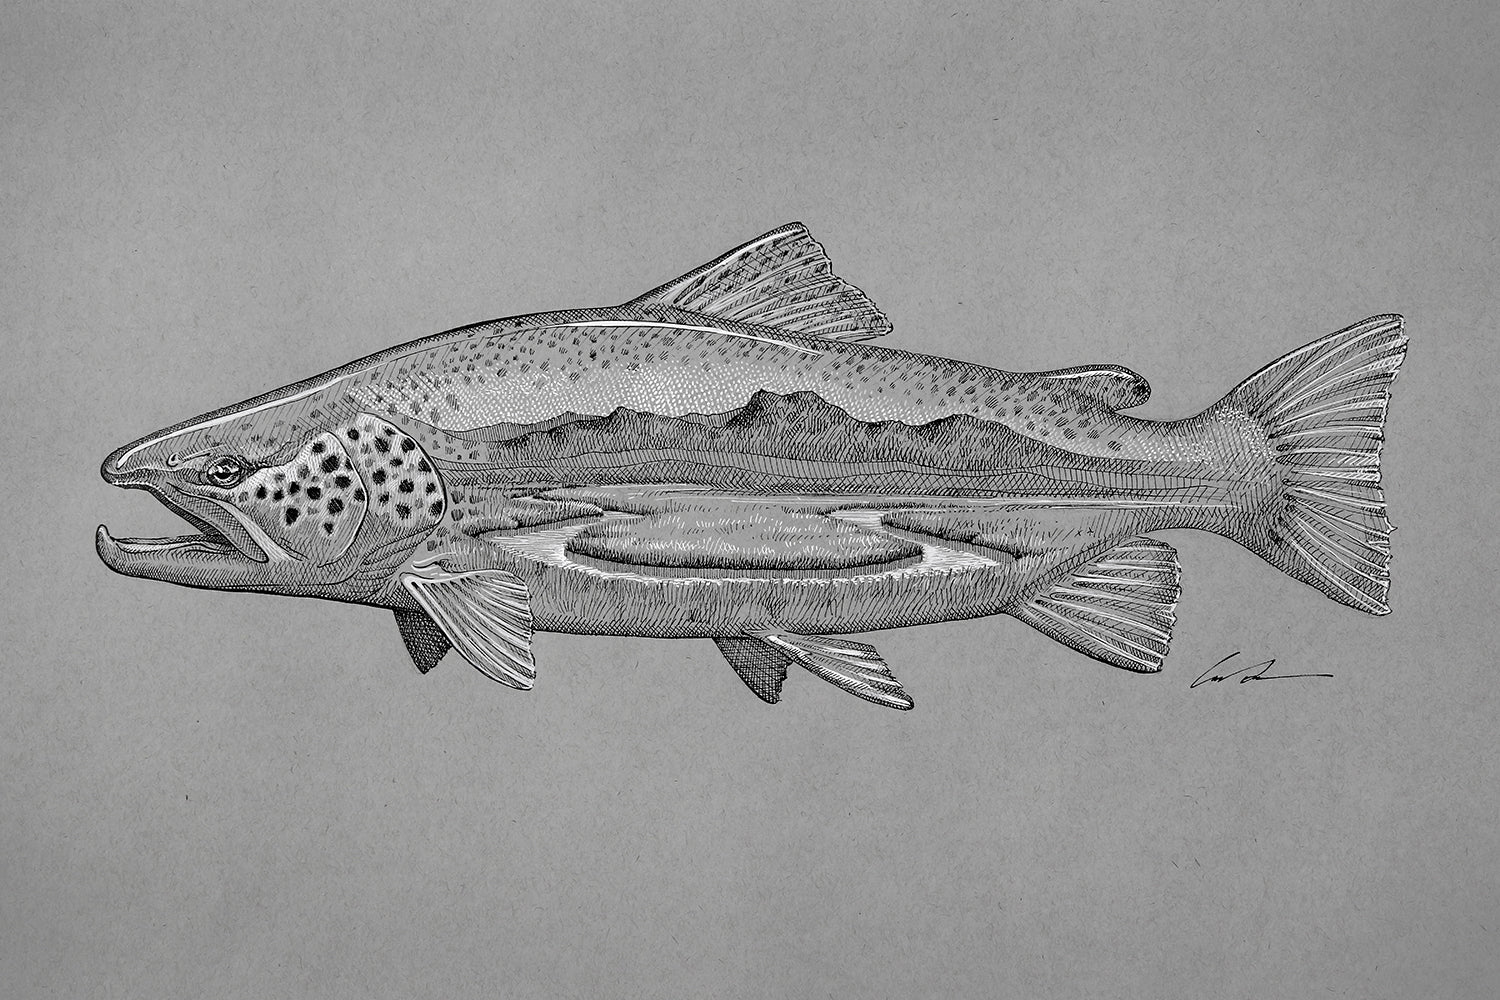 A pen and ink drawing of a brown trout with a spring creek inside of it on gray paper